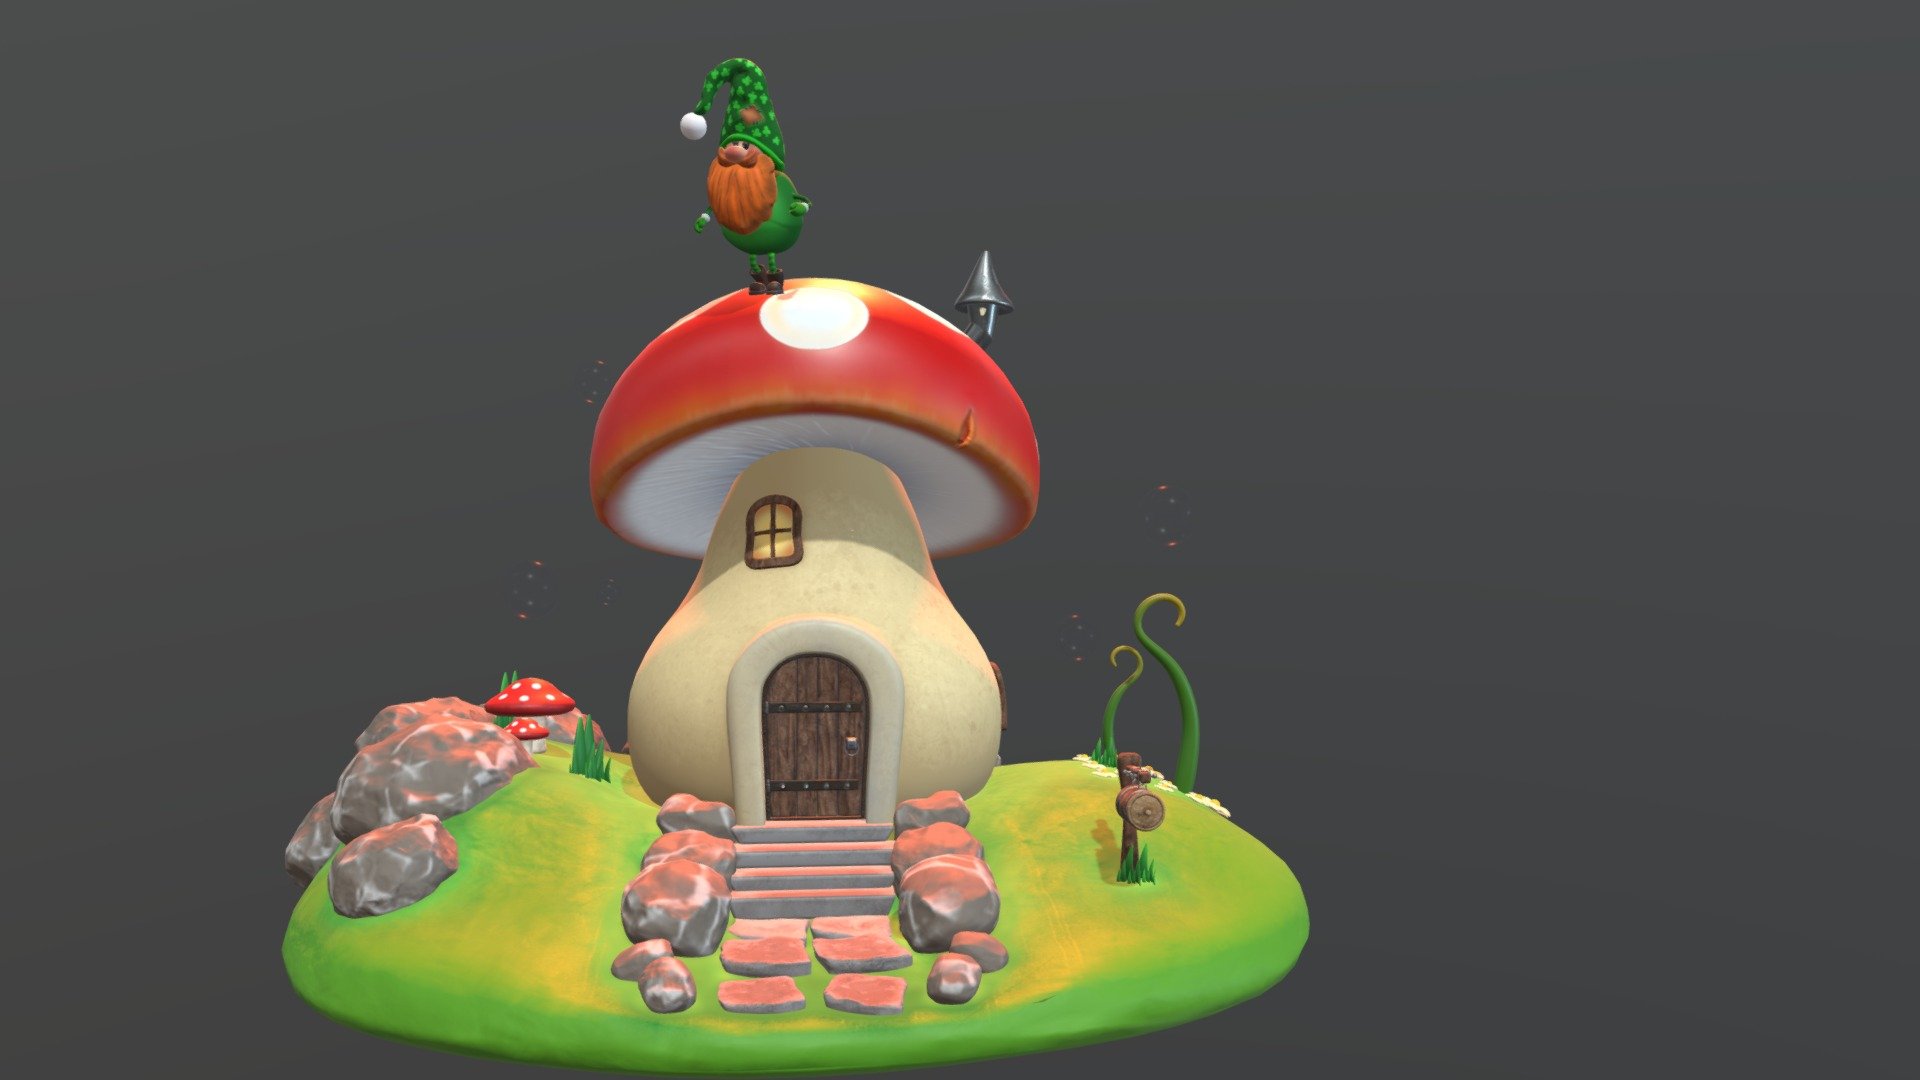 This is high quality, middle poly 3d models ready for game, advertising or cartoon.




Polygons 147450

Vertices 148407
Archive includes 3 folders:




Gnomes.  Textures shown in the render. 3D model in A-pose. 

Mushroom house

Mushroom gnomes pose
 Each folder includes:




obj

fbx

Project Maya

File Maya 2022 (.mb)

Folder with PBR Textures Metall/Roughness4K Textures - normal, roughness, base color, metalnes (png)

Marmoset file (.tbscene)

file  substance painter (.spp)

Folder with hdri used in rendering

All models is completely UVunwrapped.

All nodes in the outliner and material have been clearly named.

Lights and Render  setting are included in the  scene. Just hit render.

Versions of programs that are included in the folder:




Maya 2022

FBX version 2020.1 Release (d10e52a2a)

Arnold Core 6.2.0.1

Marmoset Toolbag 4 v4.04(4043)2022

Adobe Substance 3D Painter 7.3.0 build 1272
 - Mushroom house and gnomes set - Buy Royalty Free 3D model by lemberovairina 3d model